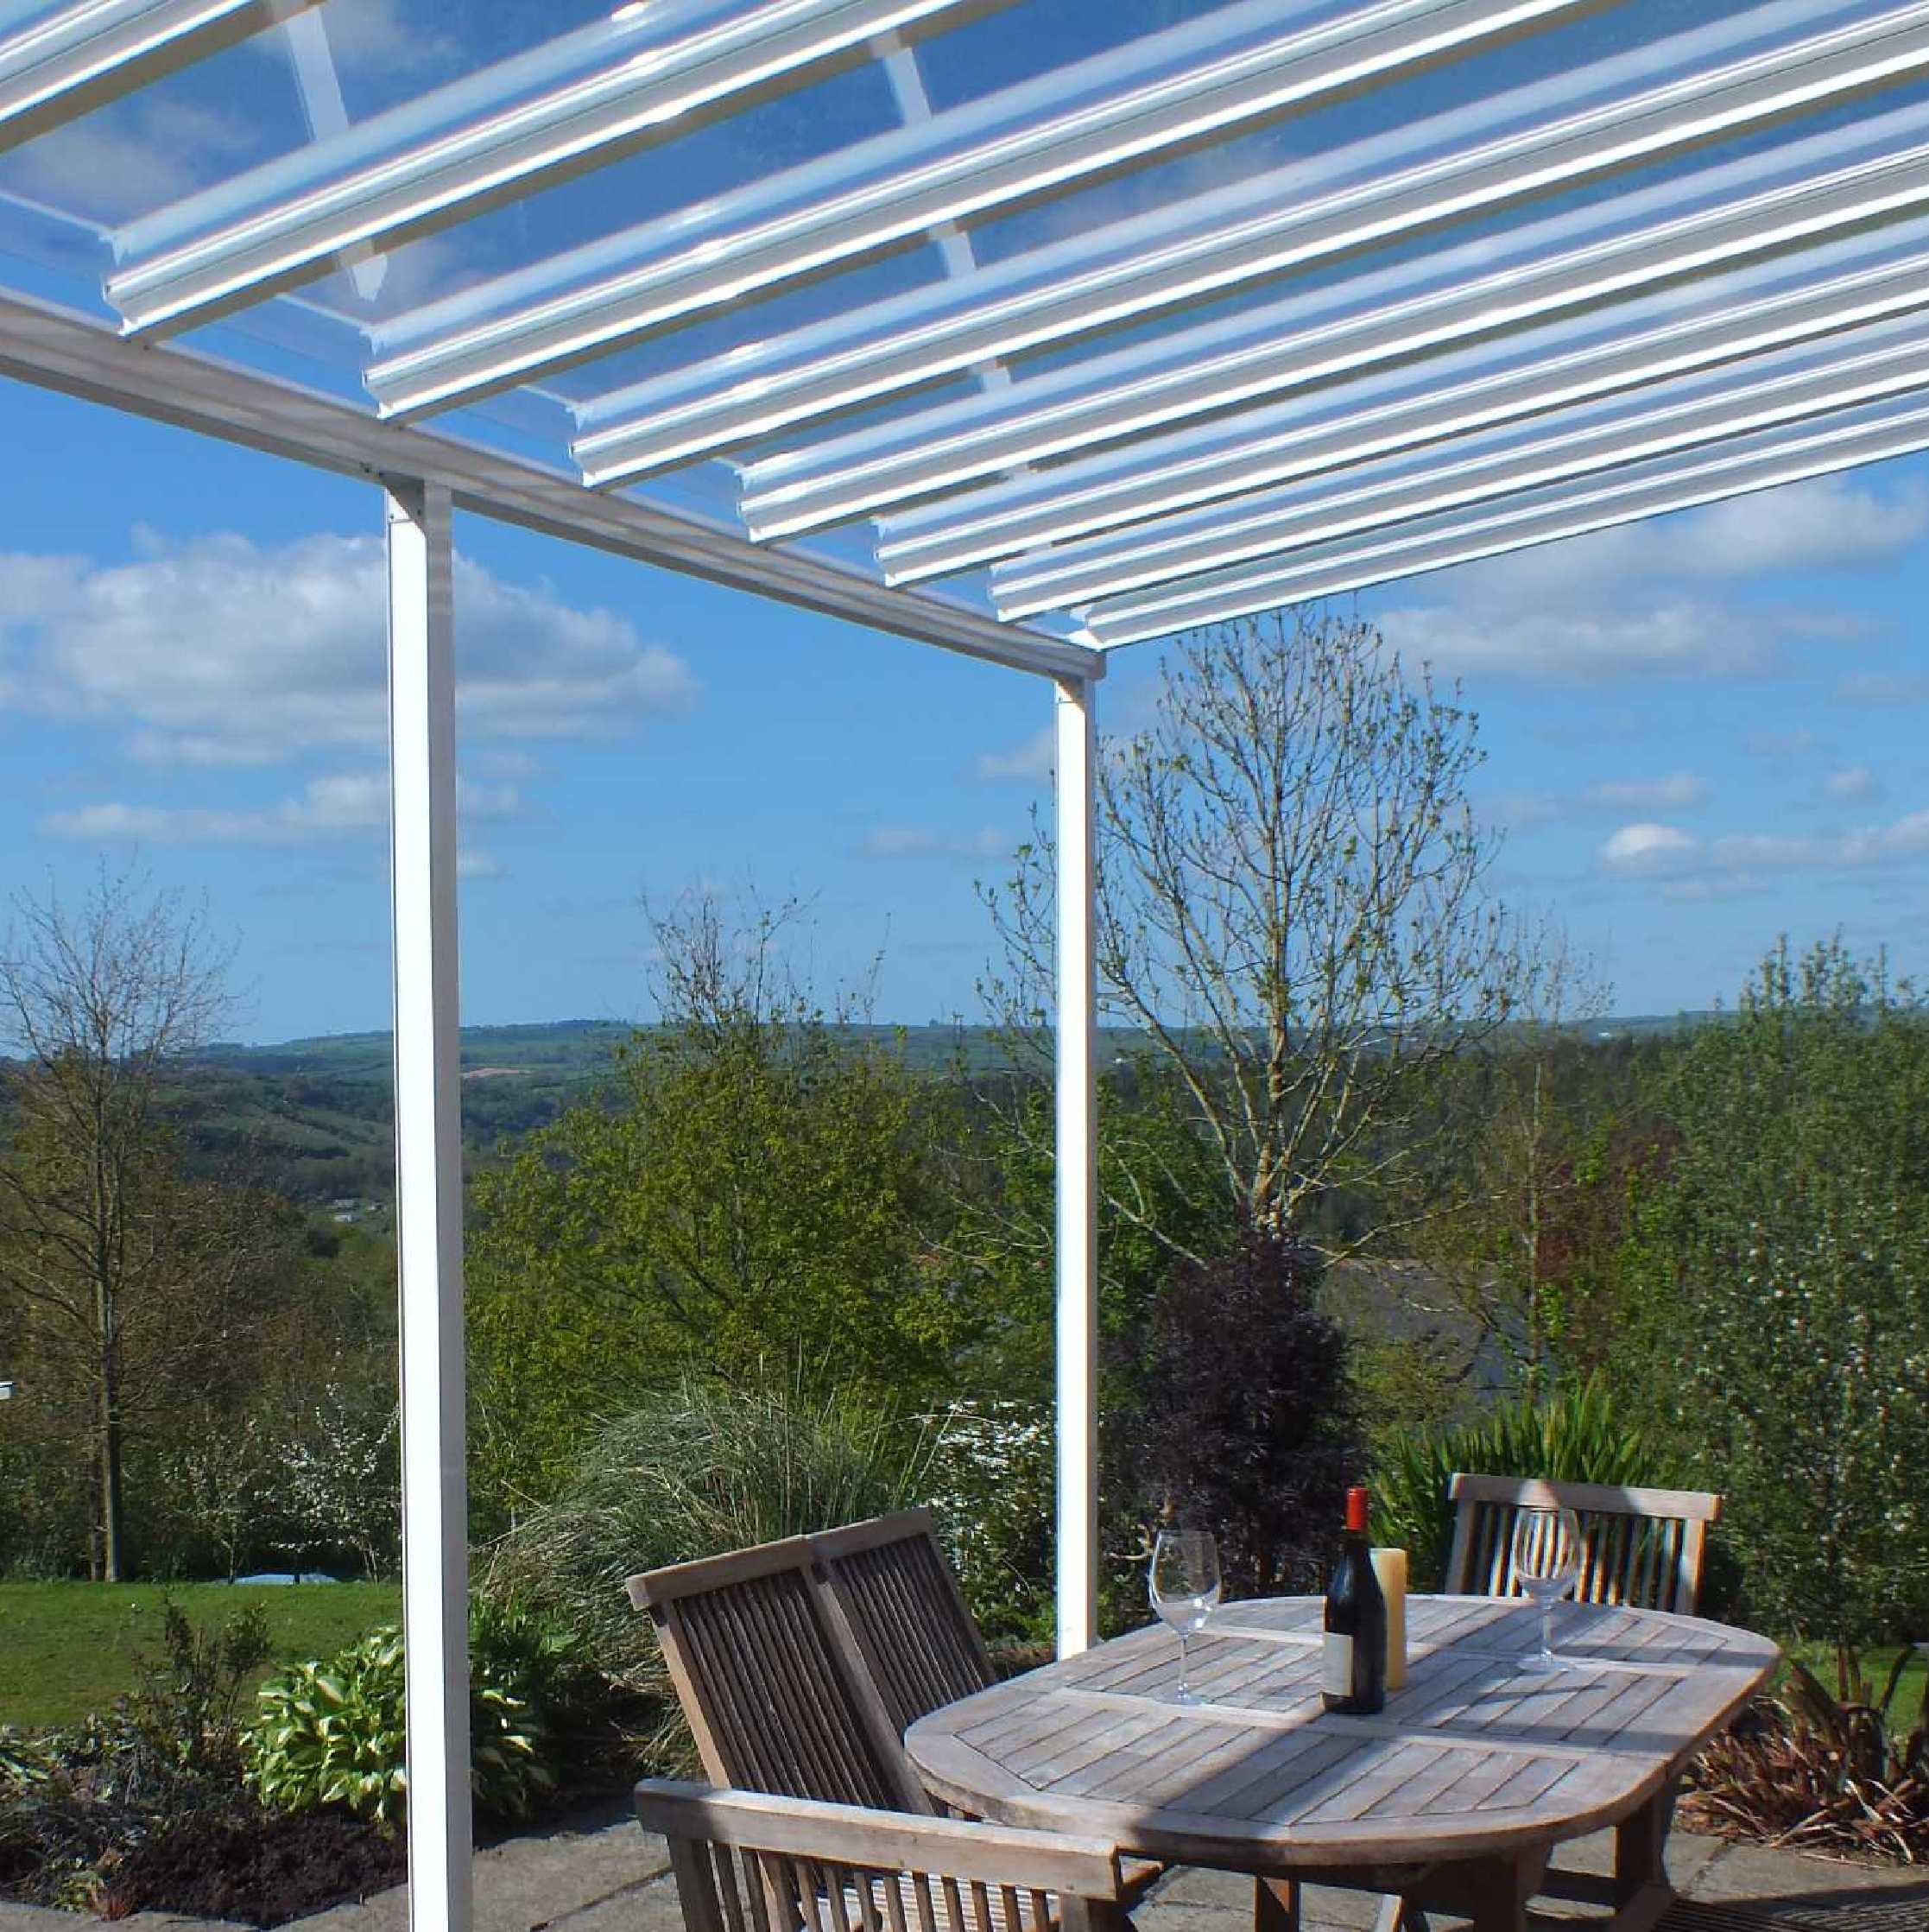 Buy Omega Smart Lean-To Canopy, White UNGLAZED for 6mm Glazing - 10.5m (W) x 1.5m (P), (5) Supporting Posts online today